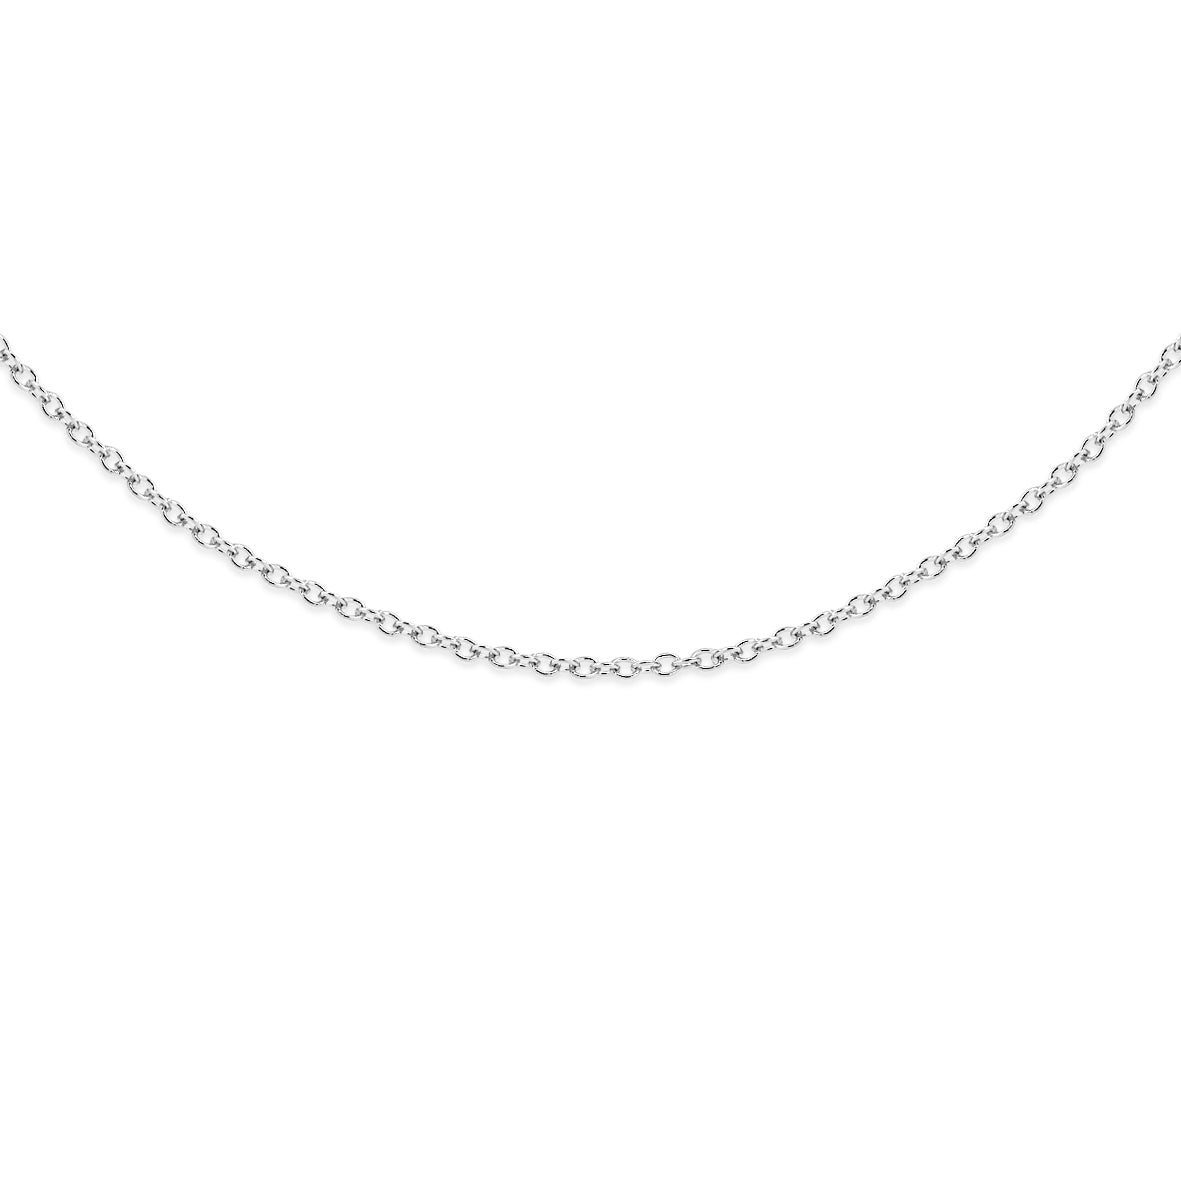 9ct white gold cable chain